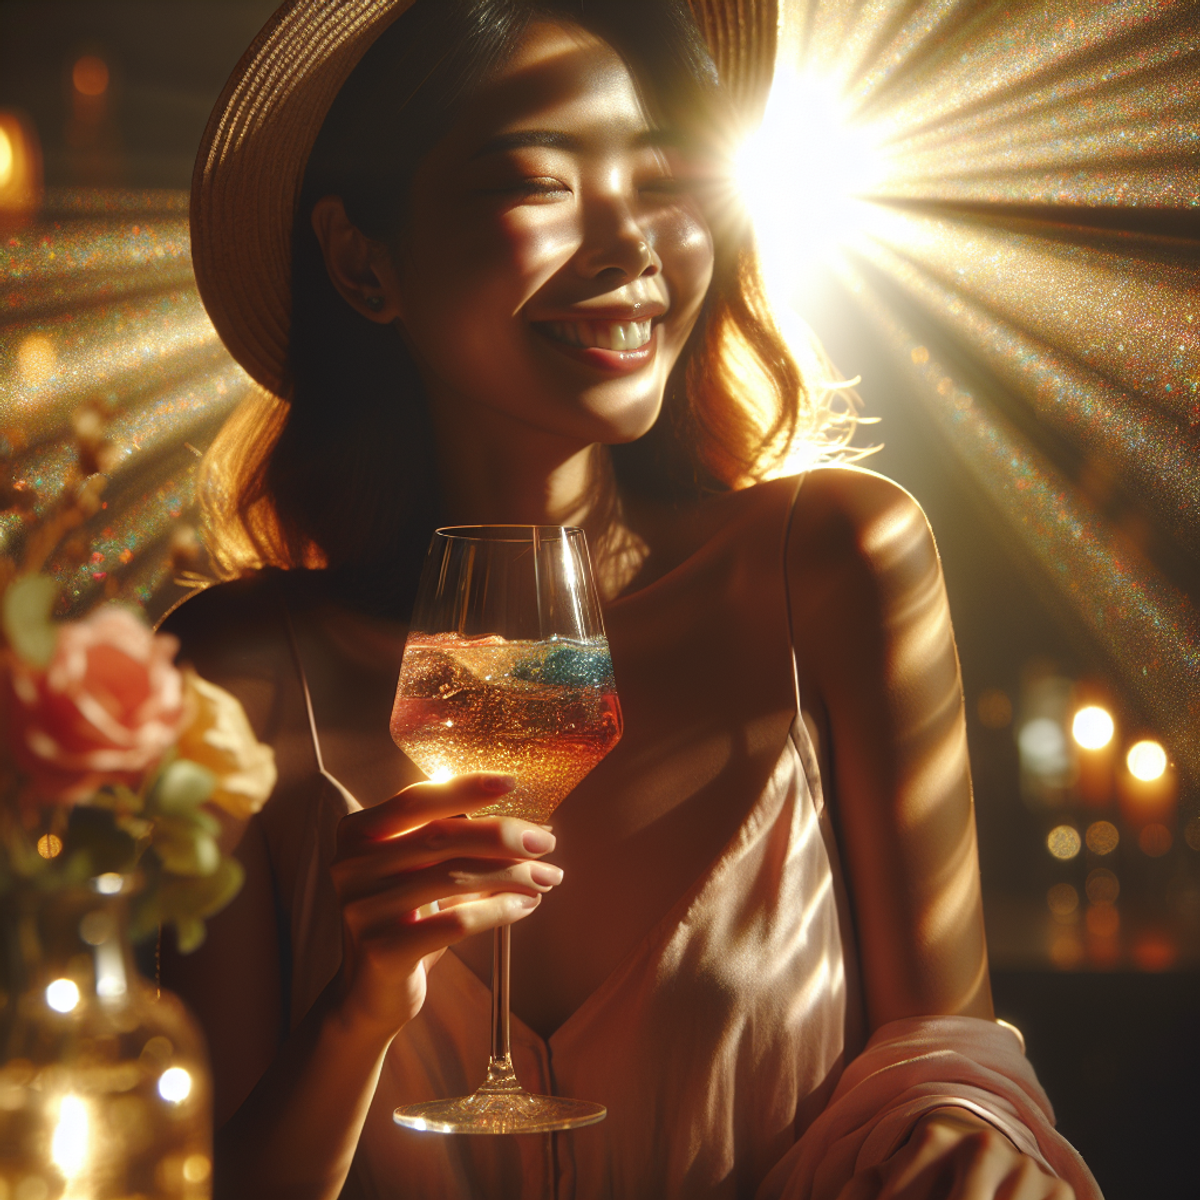 Alt text: A smiling Asian woman holding a glass of colorful cocktail, illuminated by a golden beam of sunlight creating enchanting shadows and highlights.